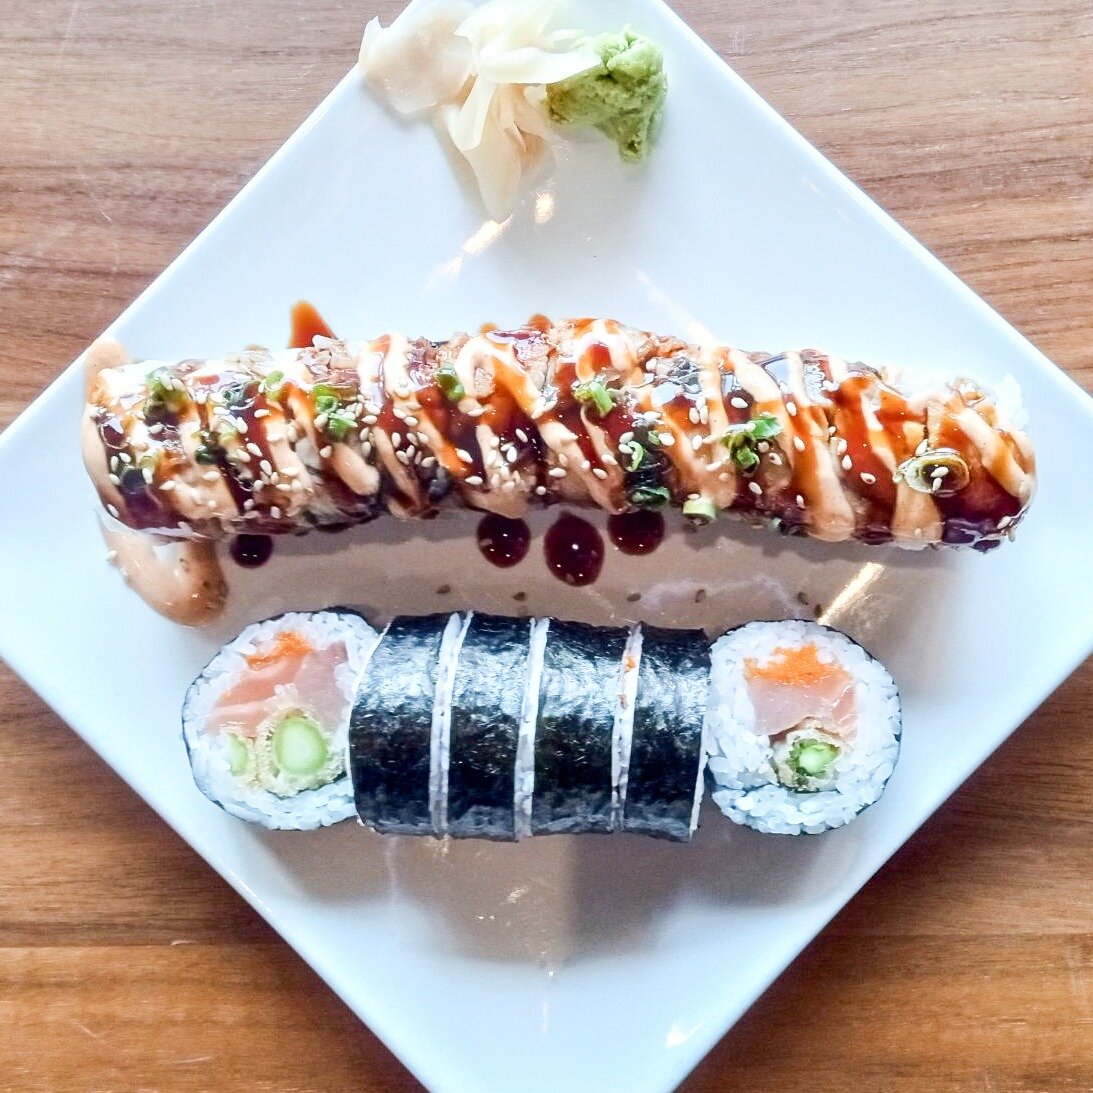 What's better than one Cody? Two Cody's! Can't decide which Cody roll you like better? Get them both. #tulsafoodie #tulsaeats #sushiroll